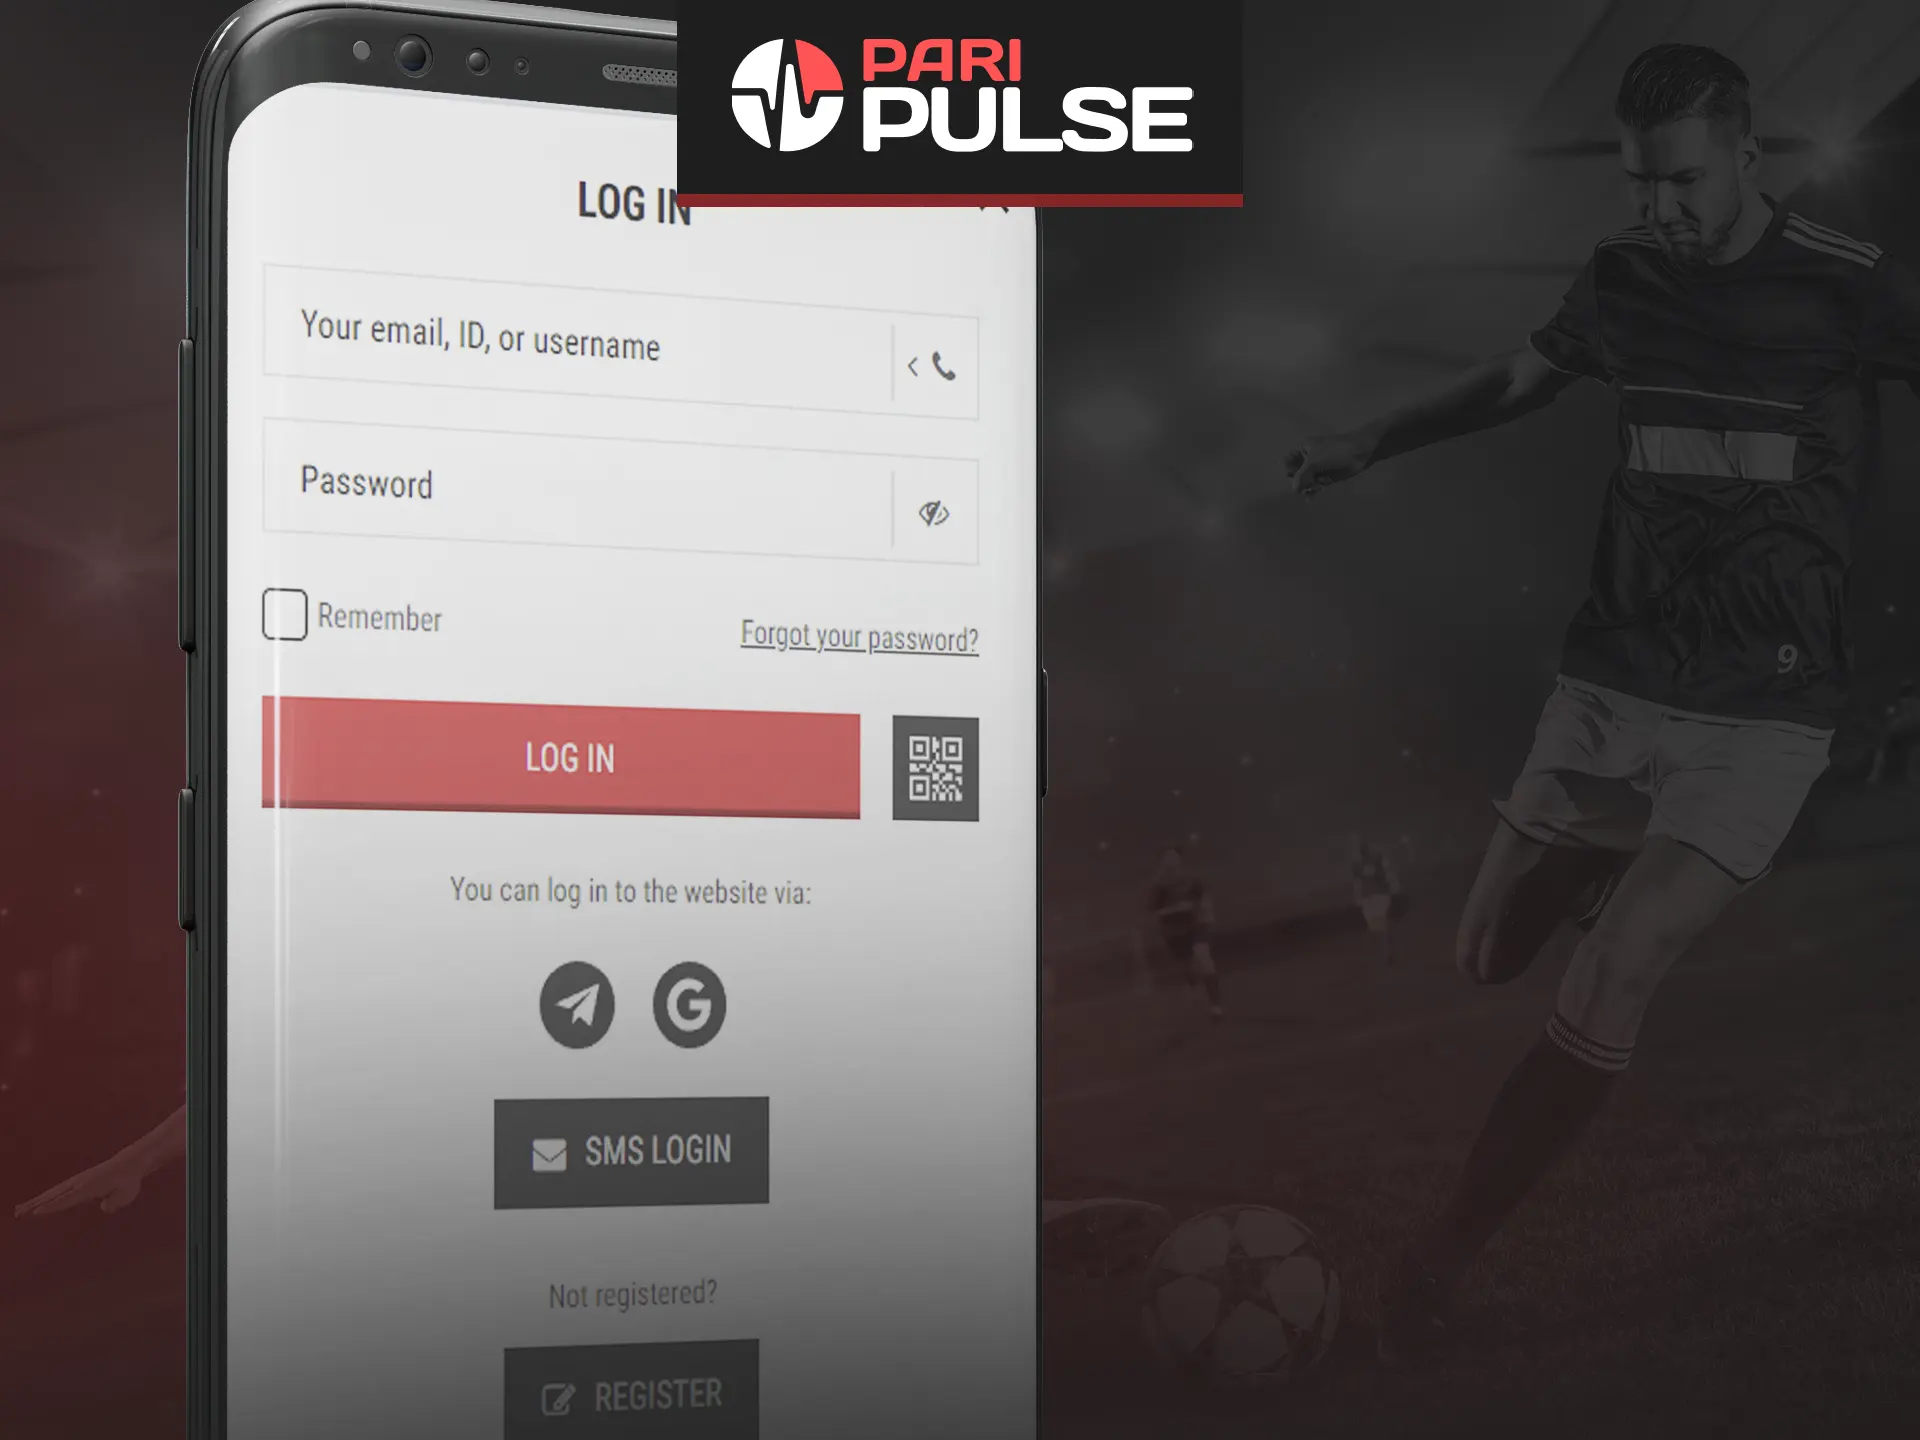 Log into your PariPulse account from your mobile device.